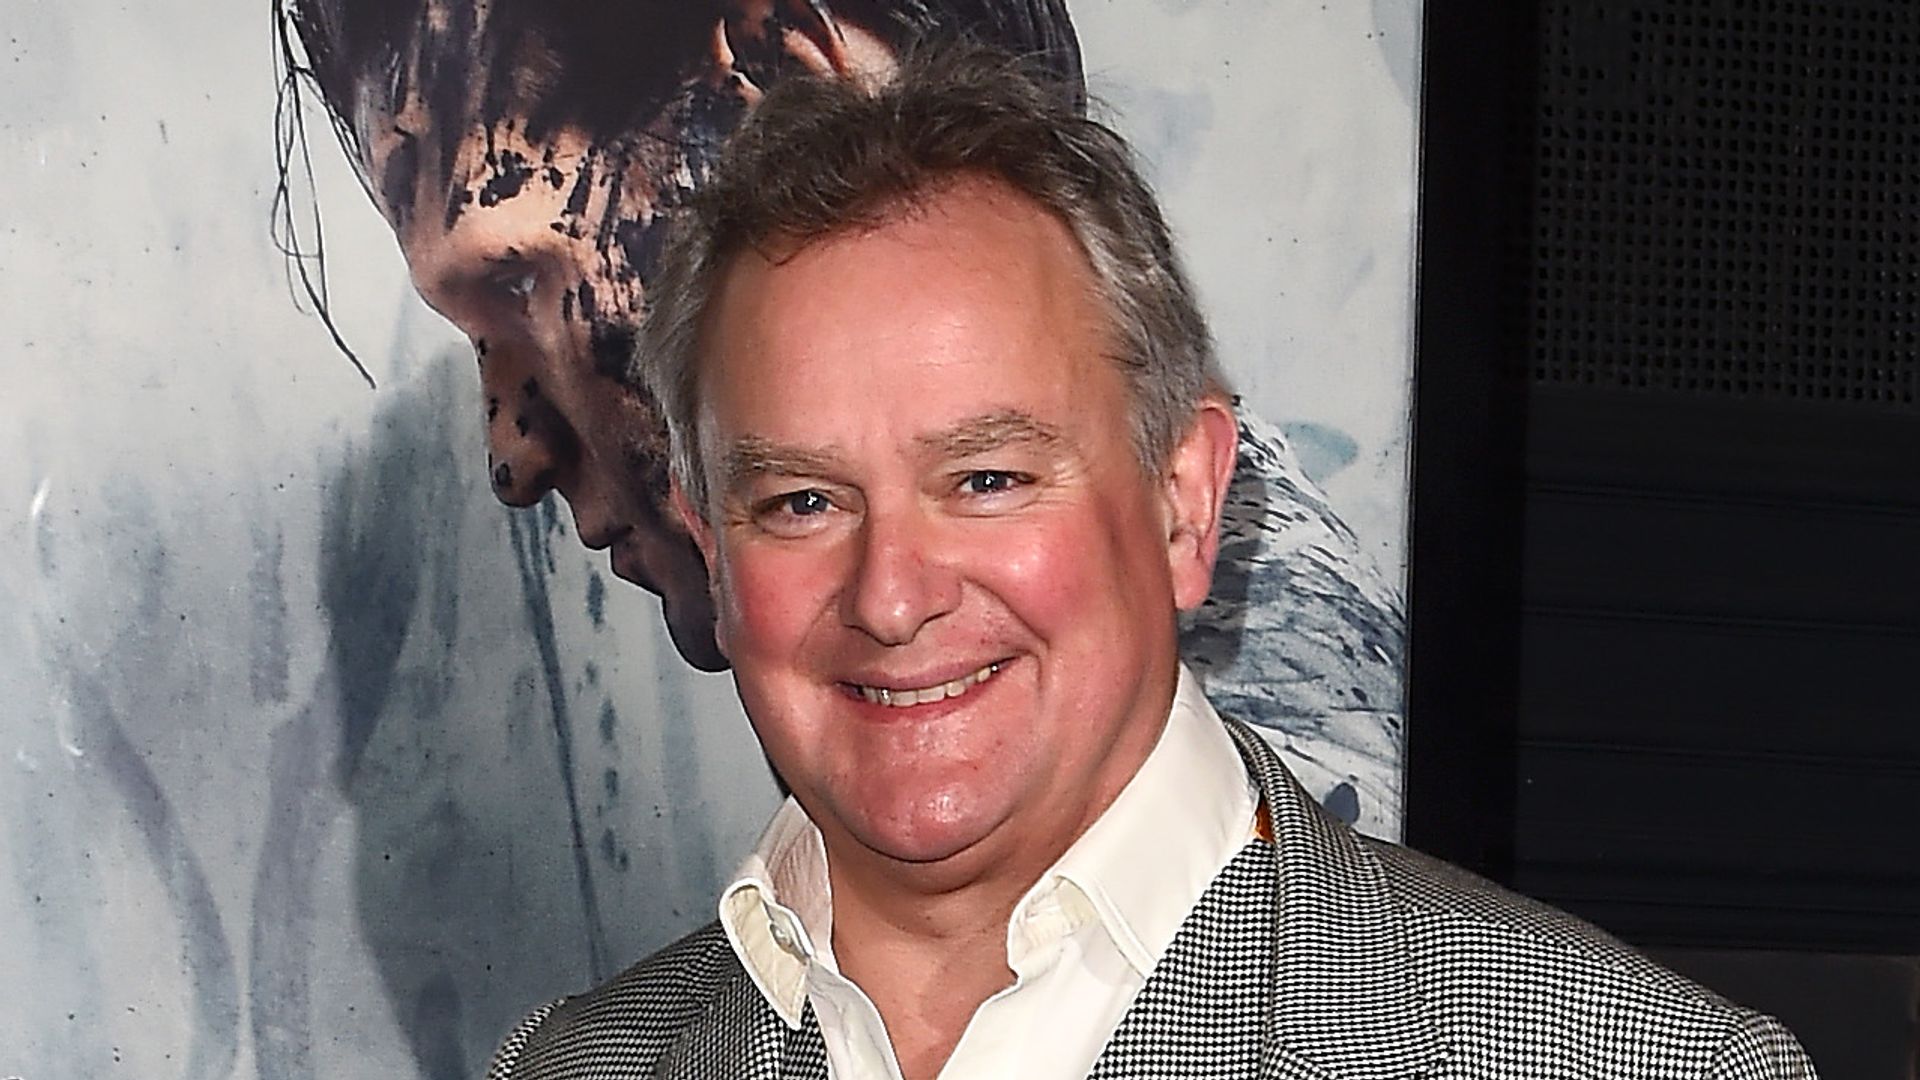 Downton Abbey's Hugh Bonneville sparks romance rumours with actress Claire Rankin after marriage split